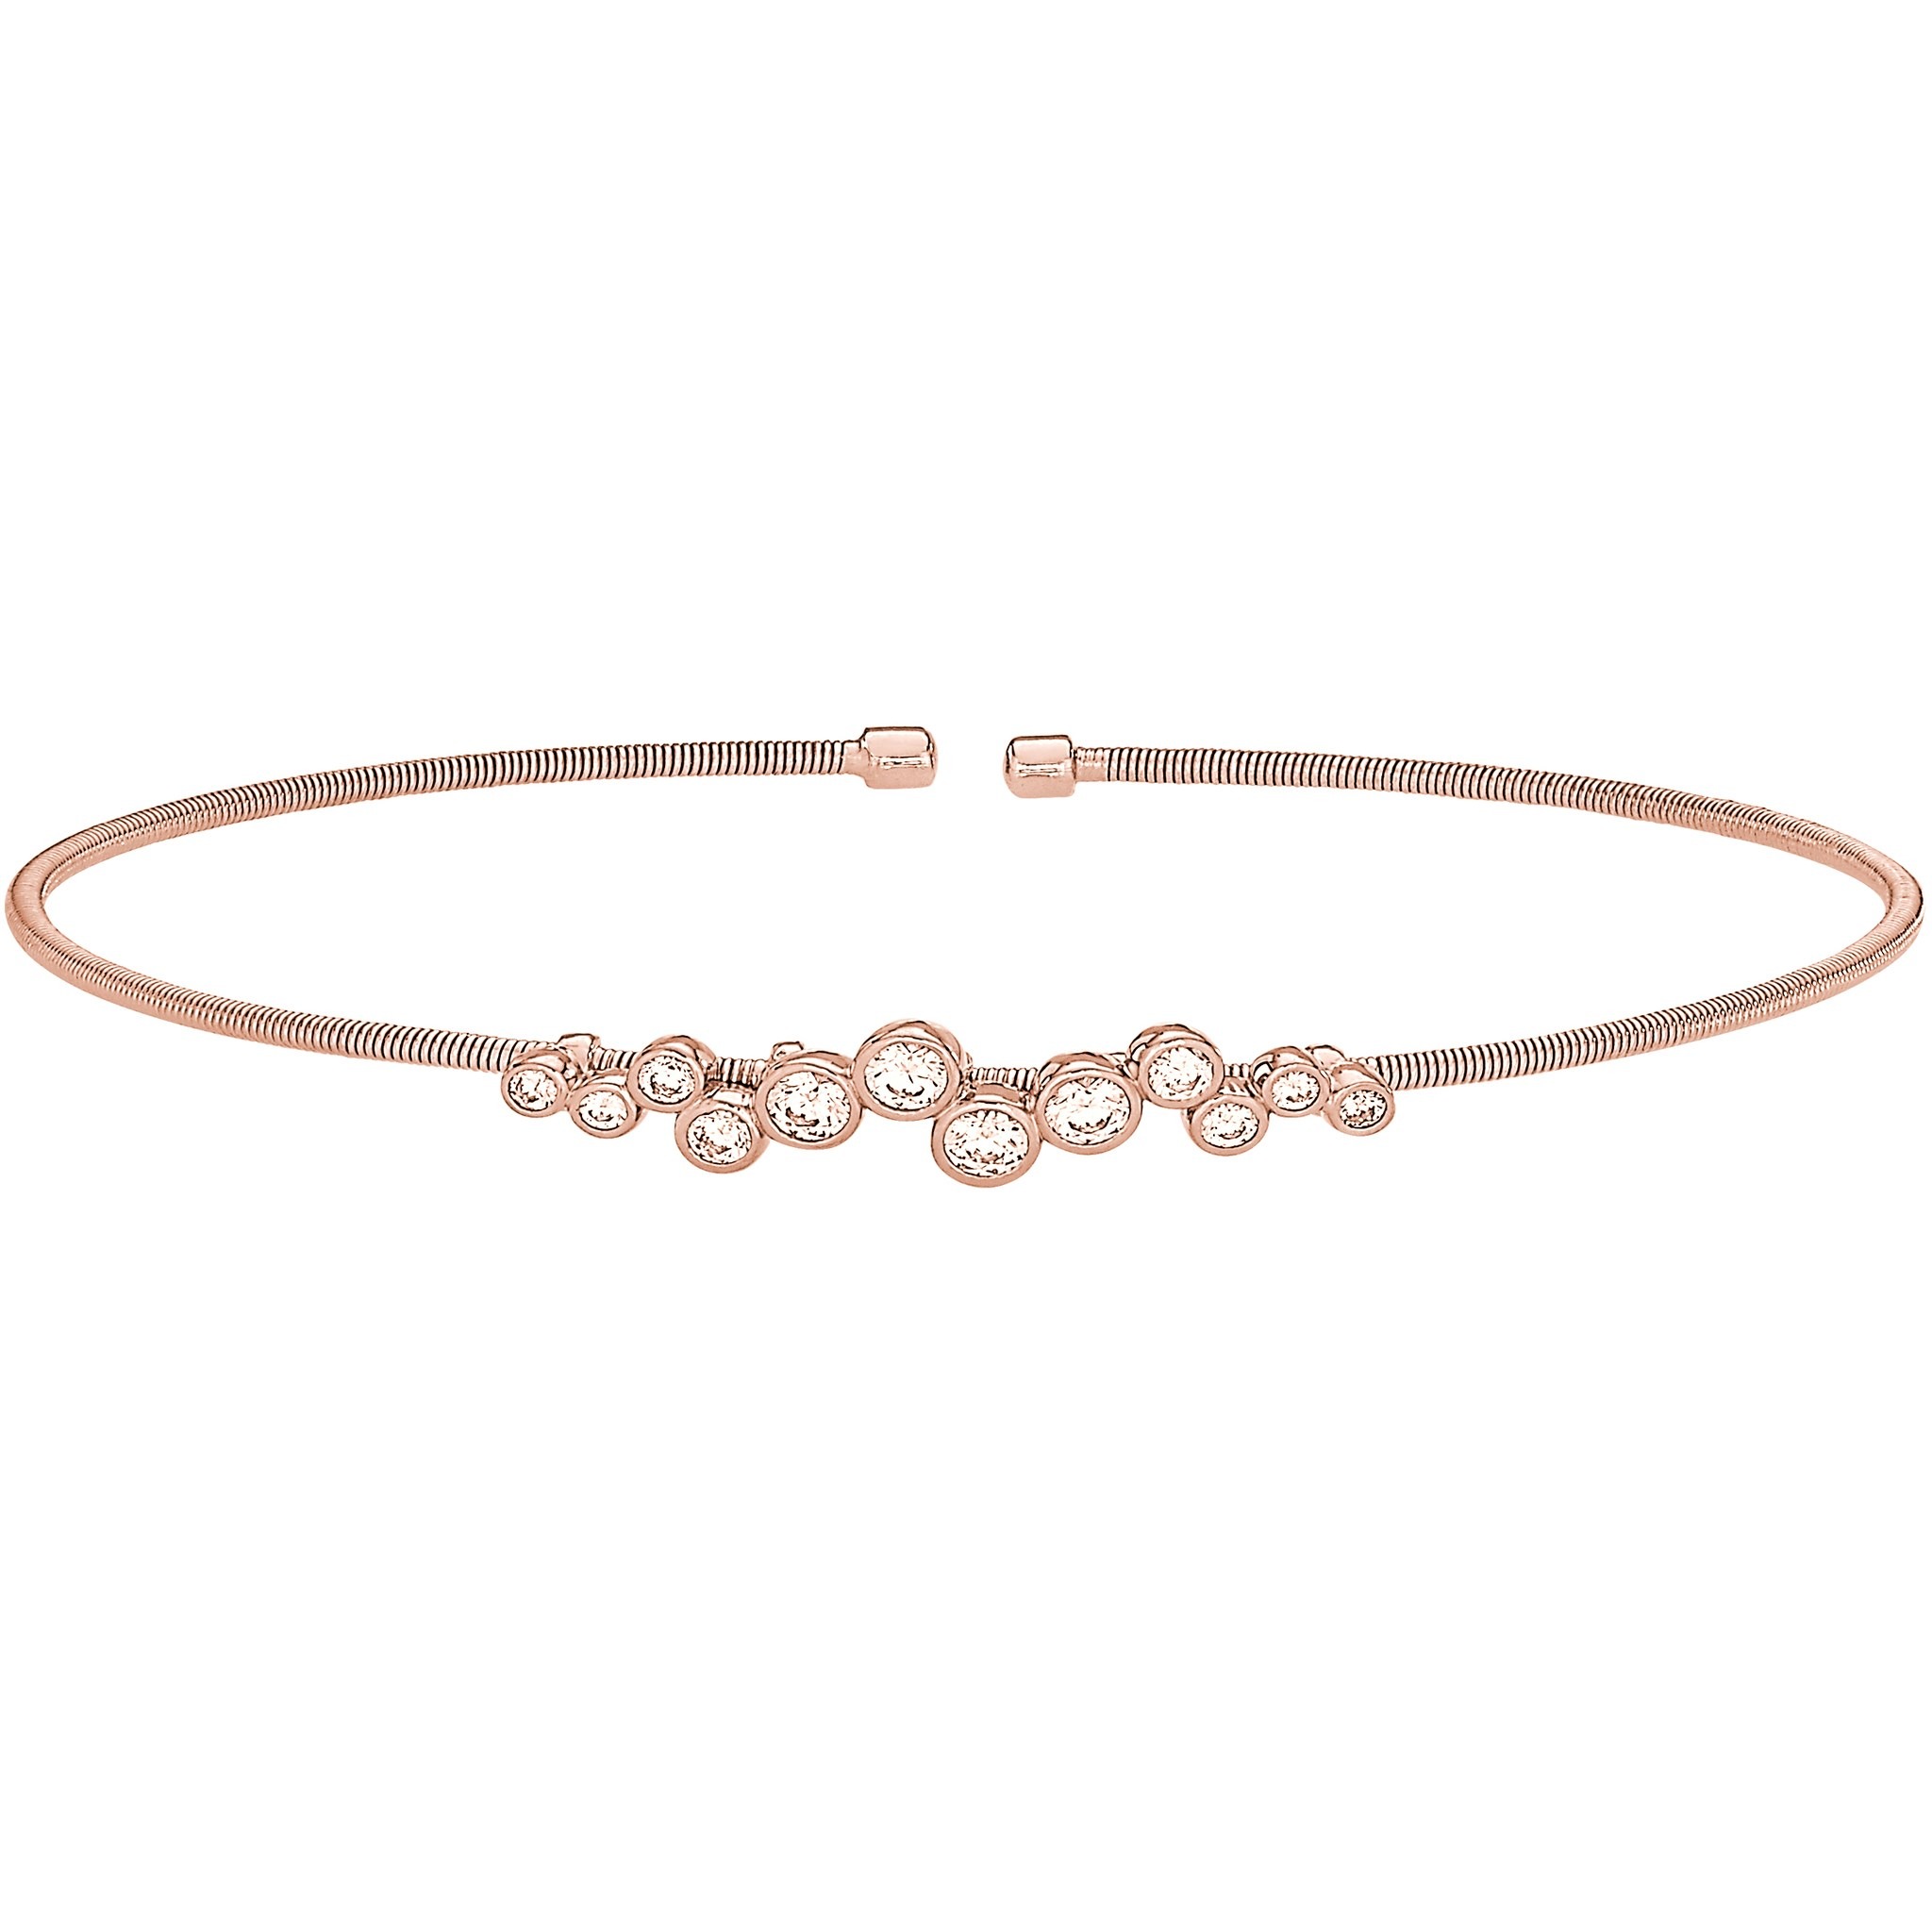 Rose Gold Finish Sterling Silver Cable Cuff Bracelet with Bubble Pattern Simulated Diamonds